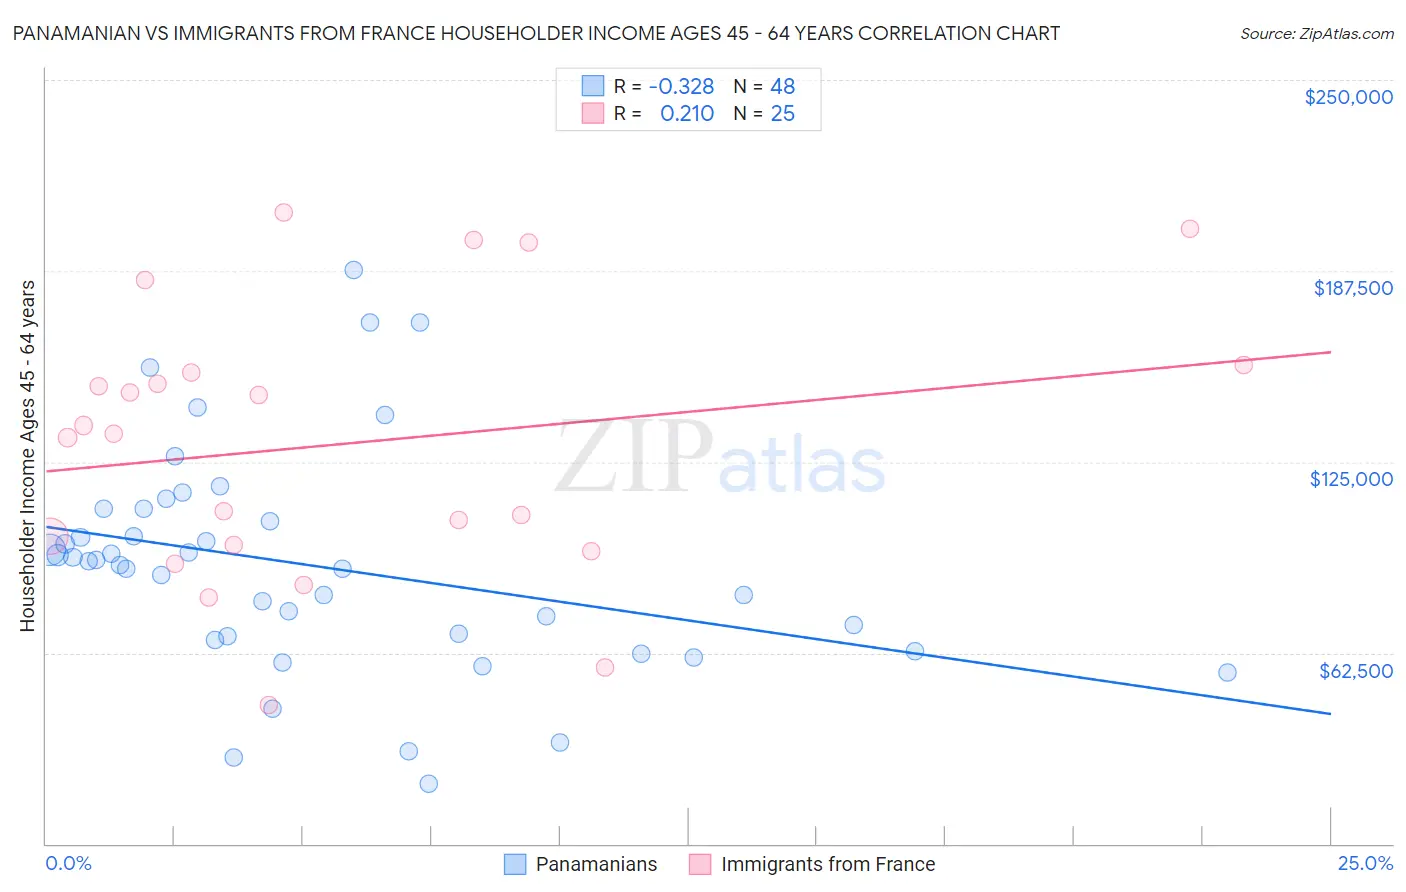 Panamanian vs Immigrants from France Householder Income Ages 45 - 64 years